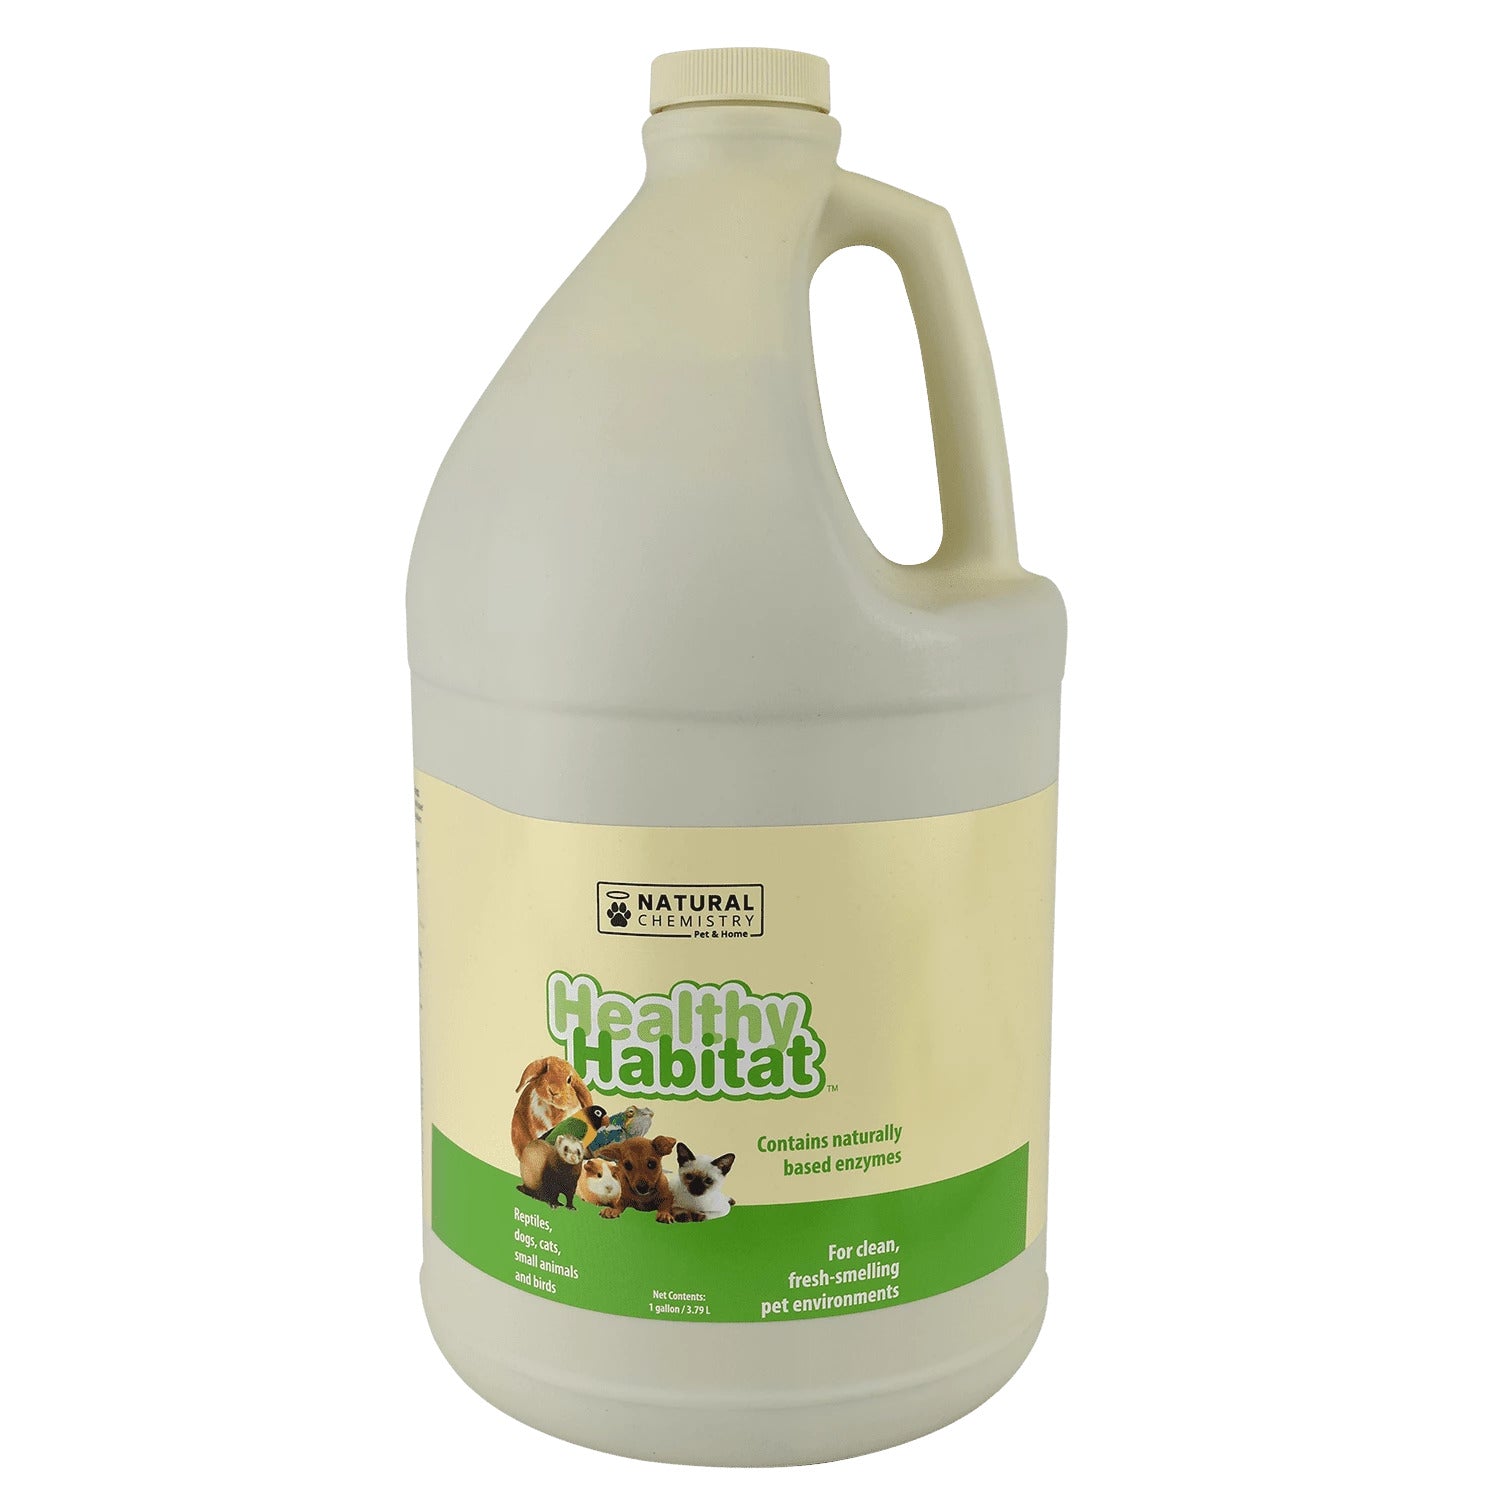 Miracle Corp Healthy Habitat Cleaner 1 gallon